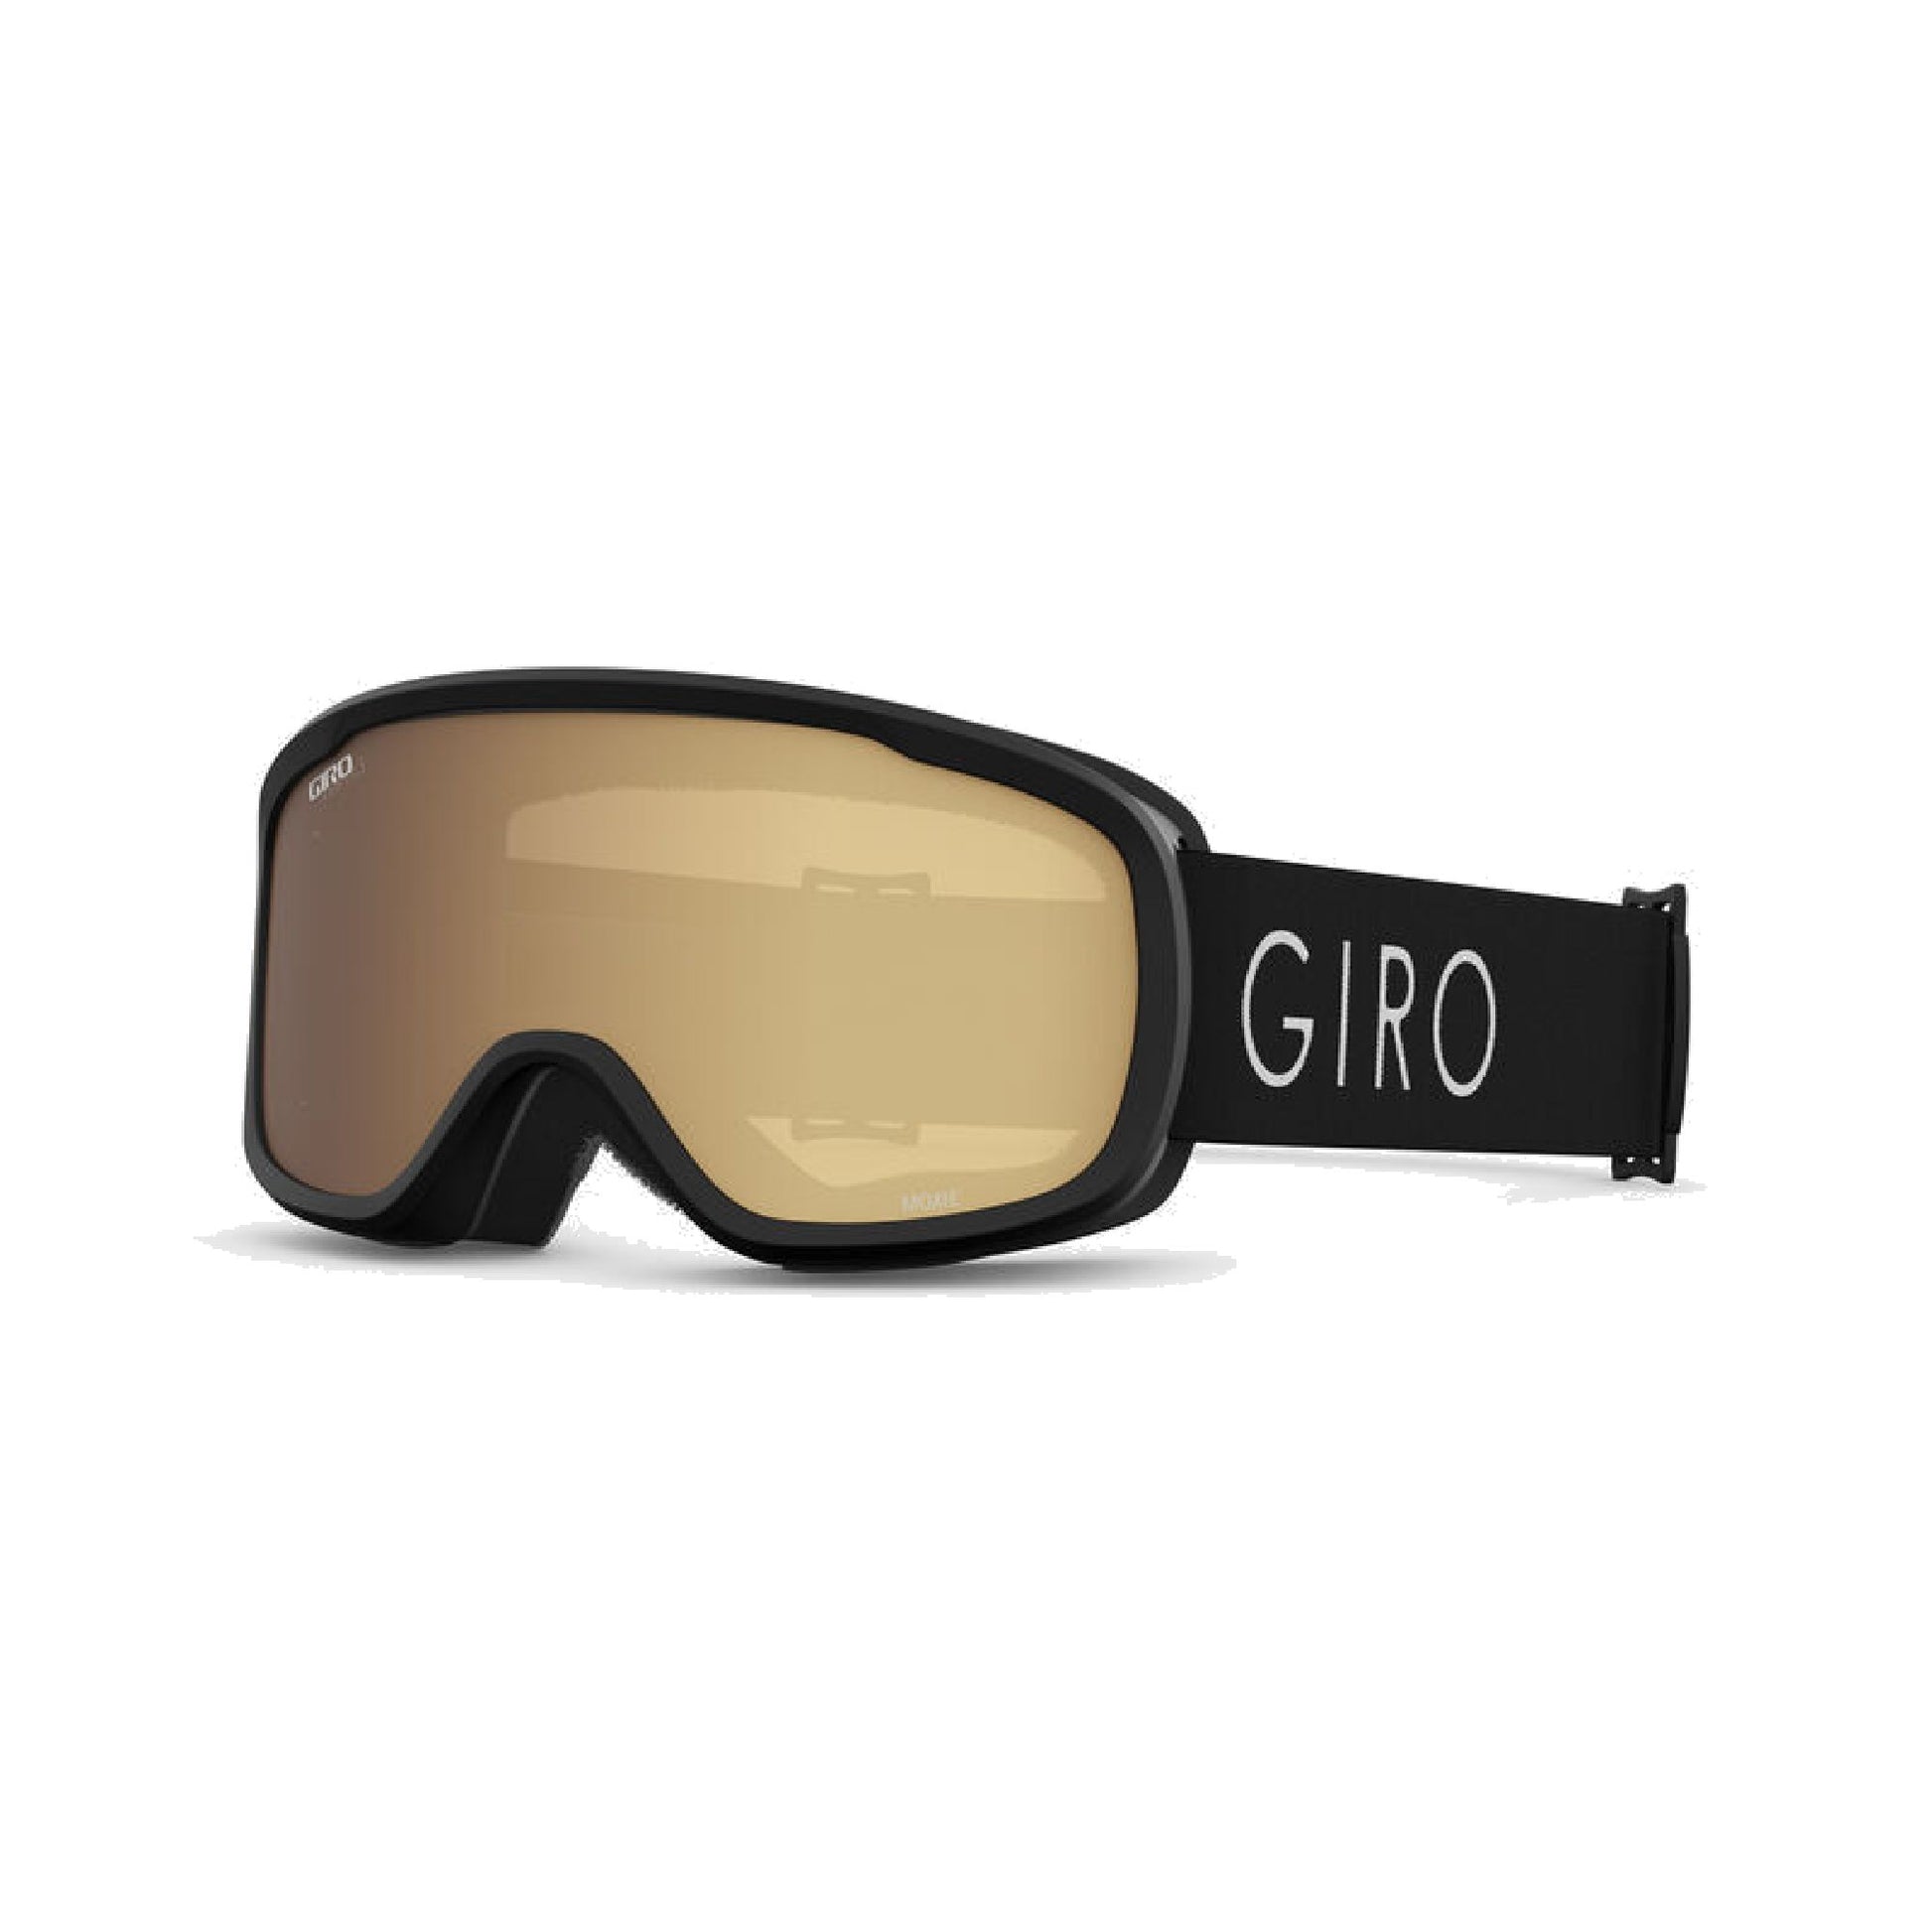 Giro Women's Moxie AF Snow Goggles Black Core Light Amber Gold Snow Goggles